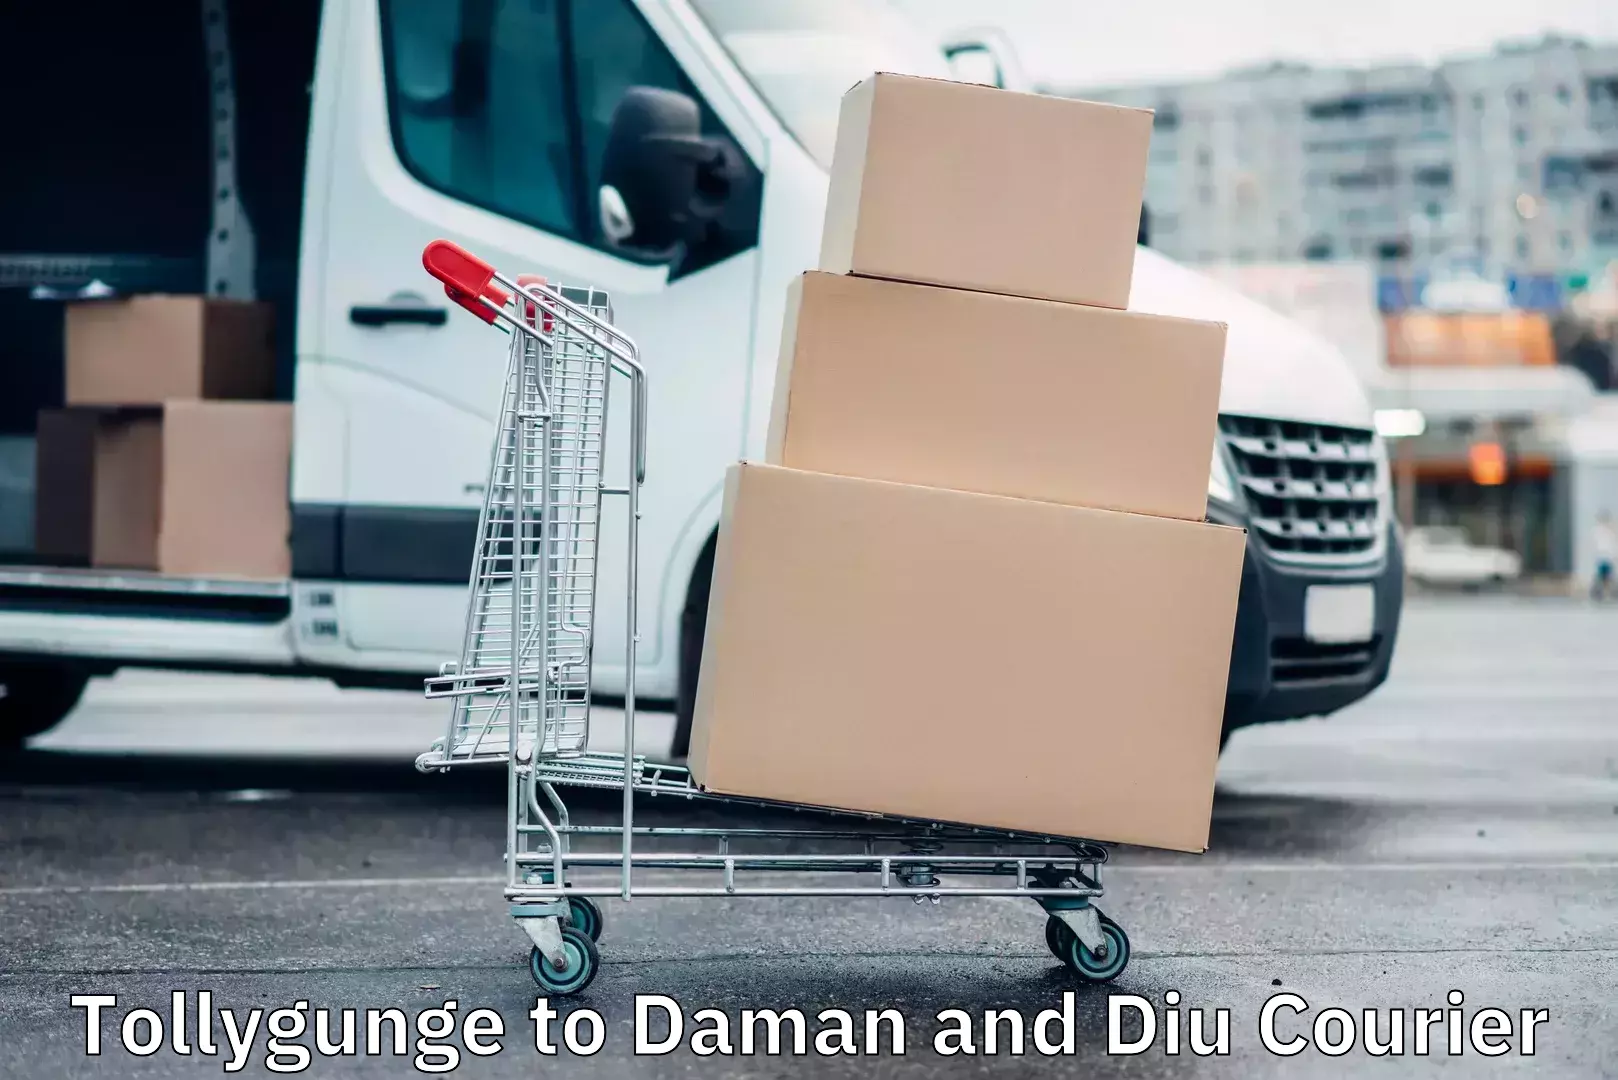 Efficient parcel delivery in Tollygunge to Daman and Diu